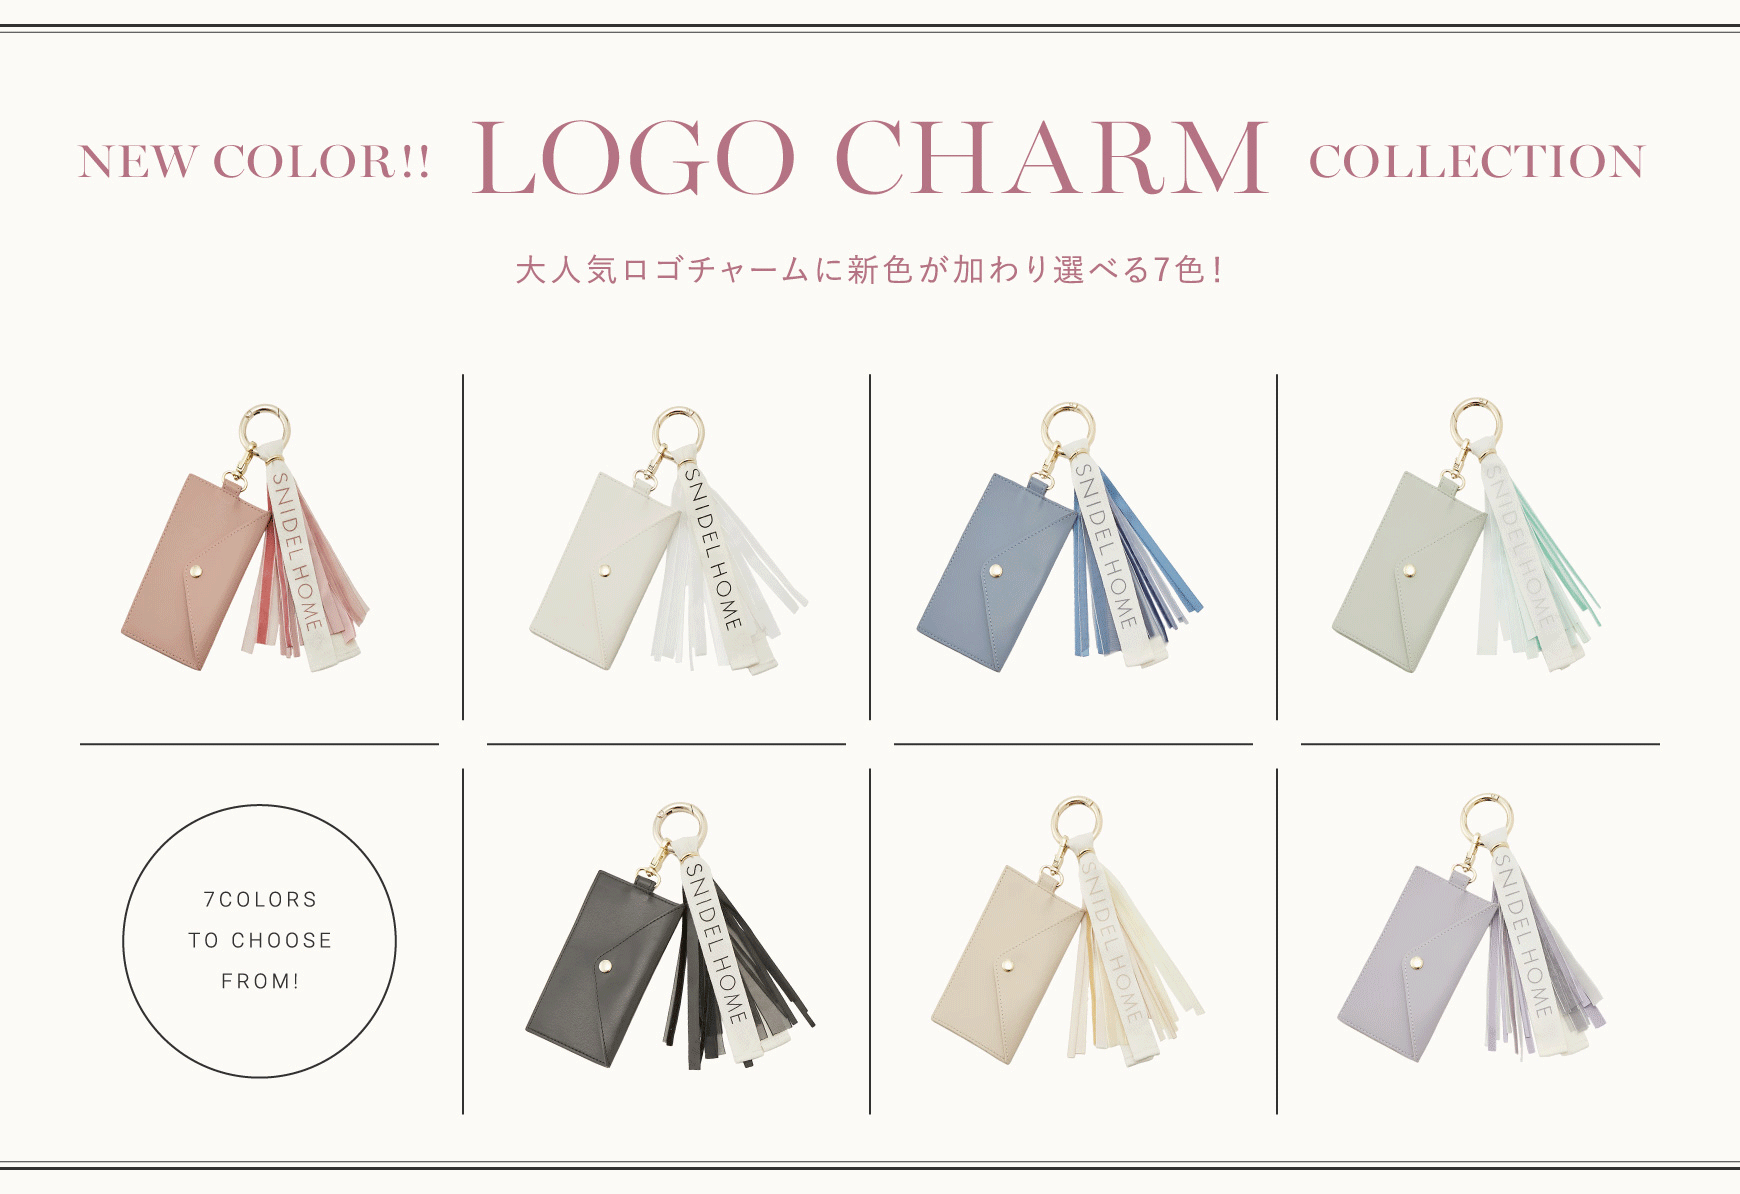 NEW COLOR!! LOGO CHARM COLLECTION